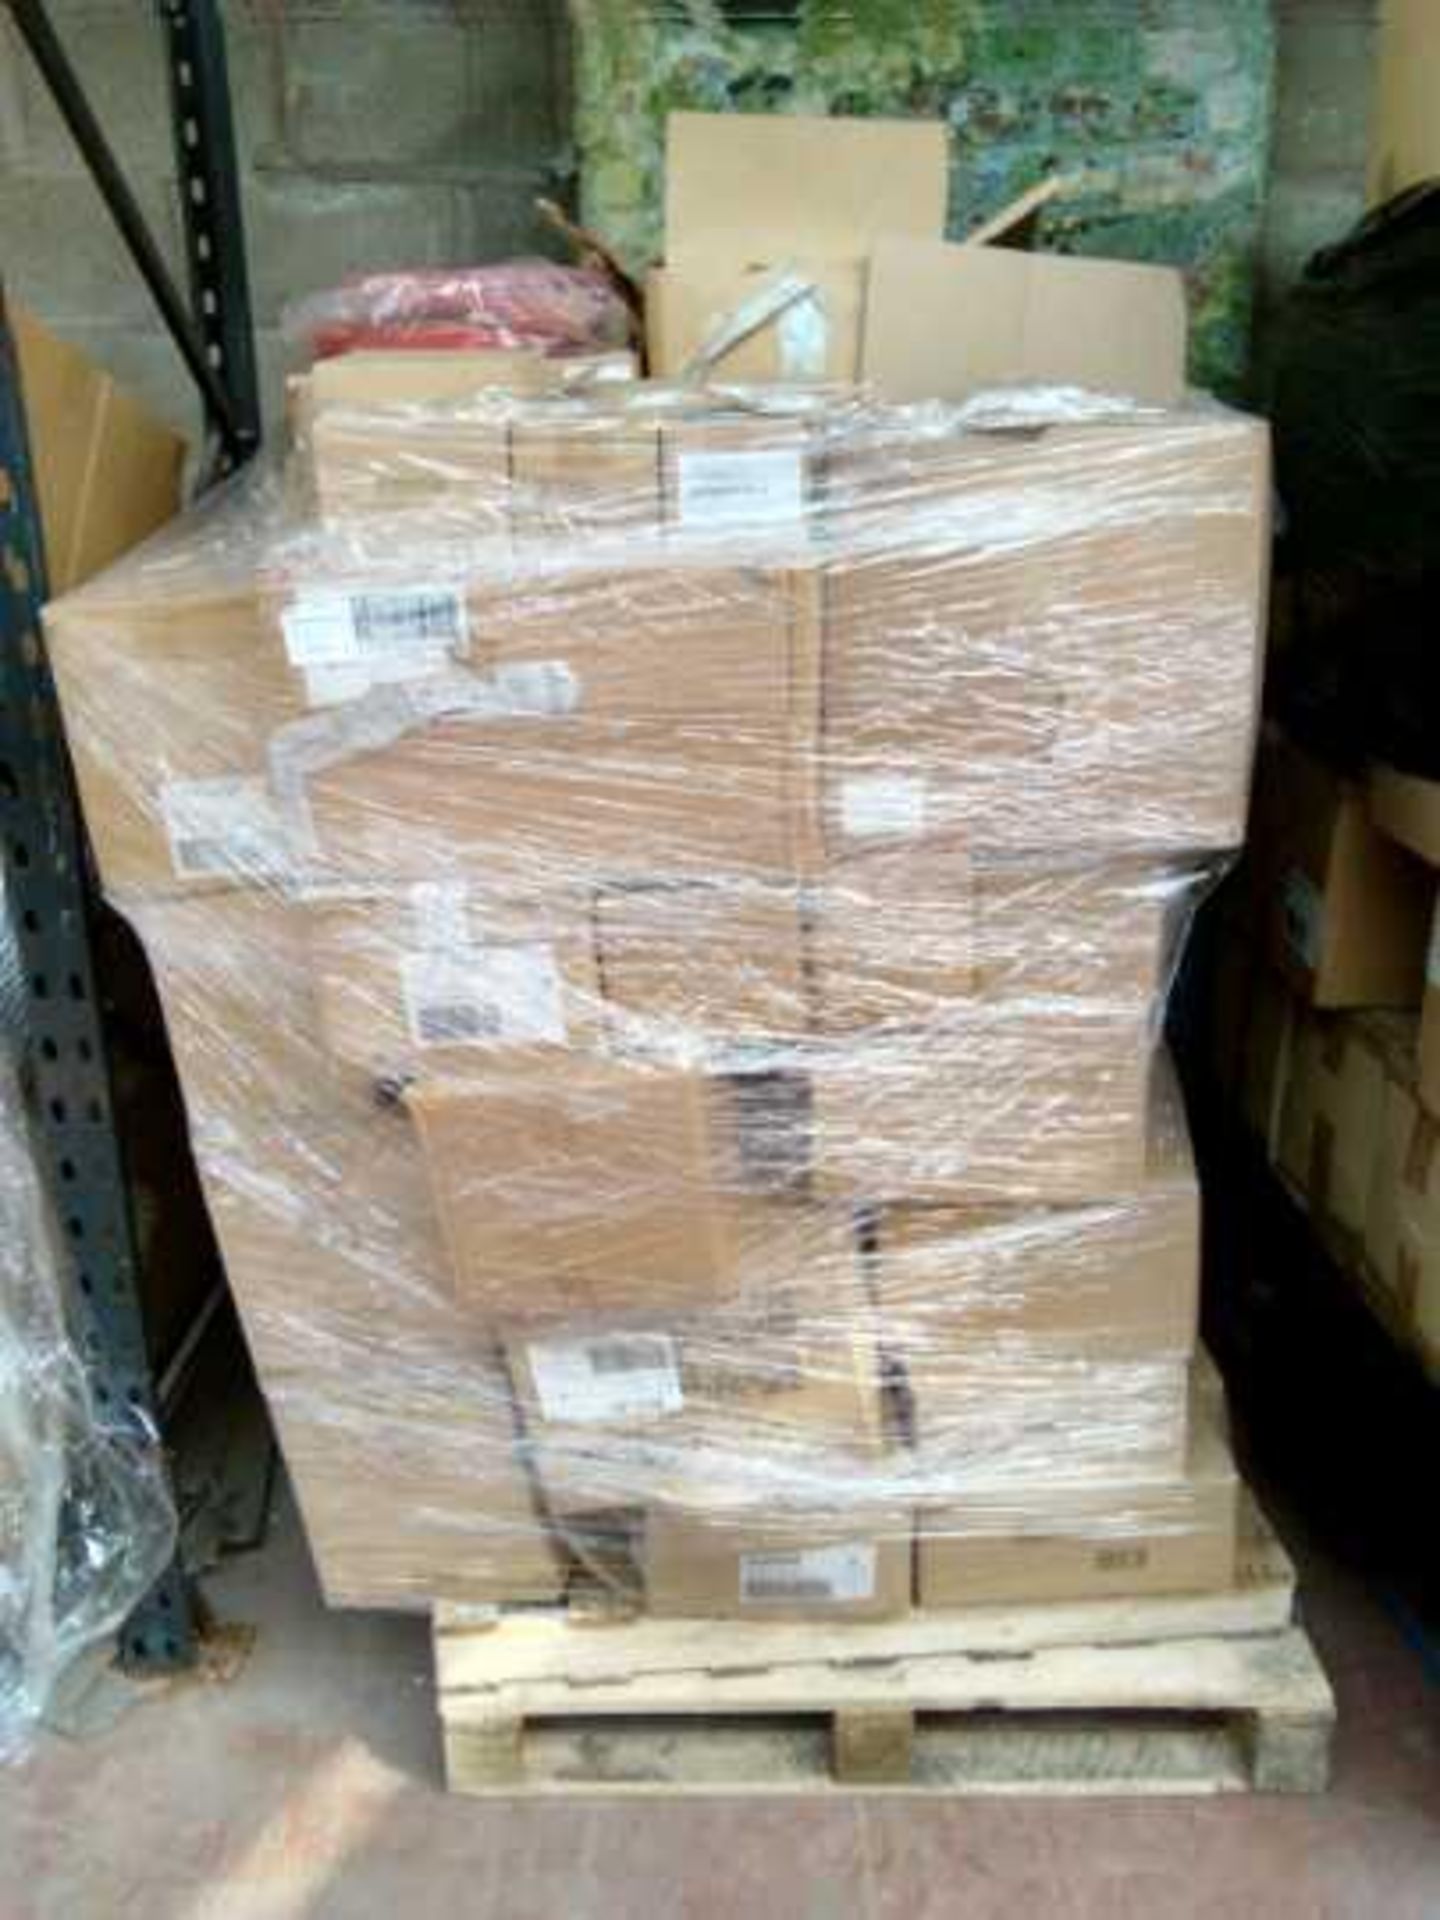 Pallet of Mixed unmanifested items from what we can see it contains me to You stock and maybe